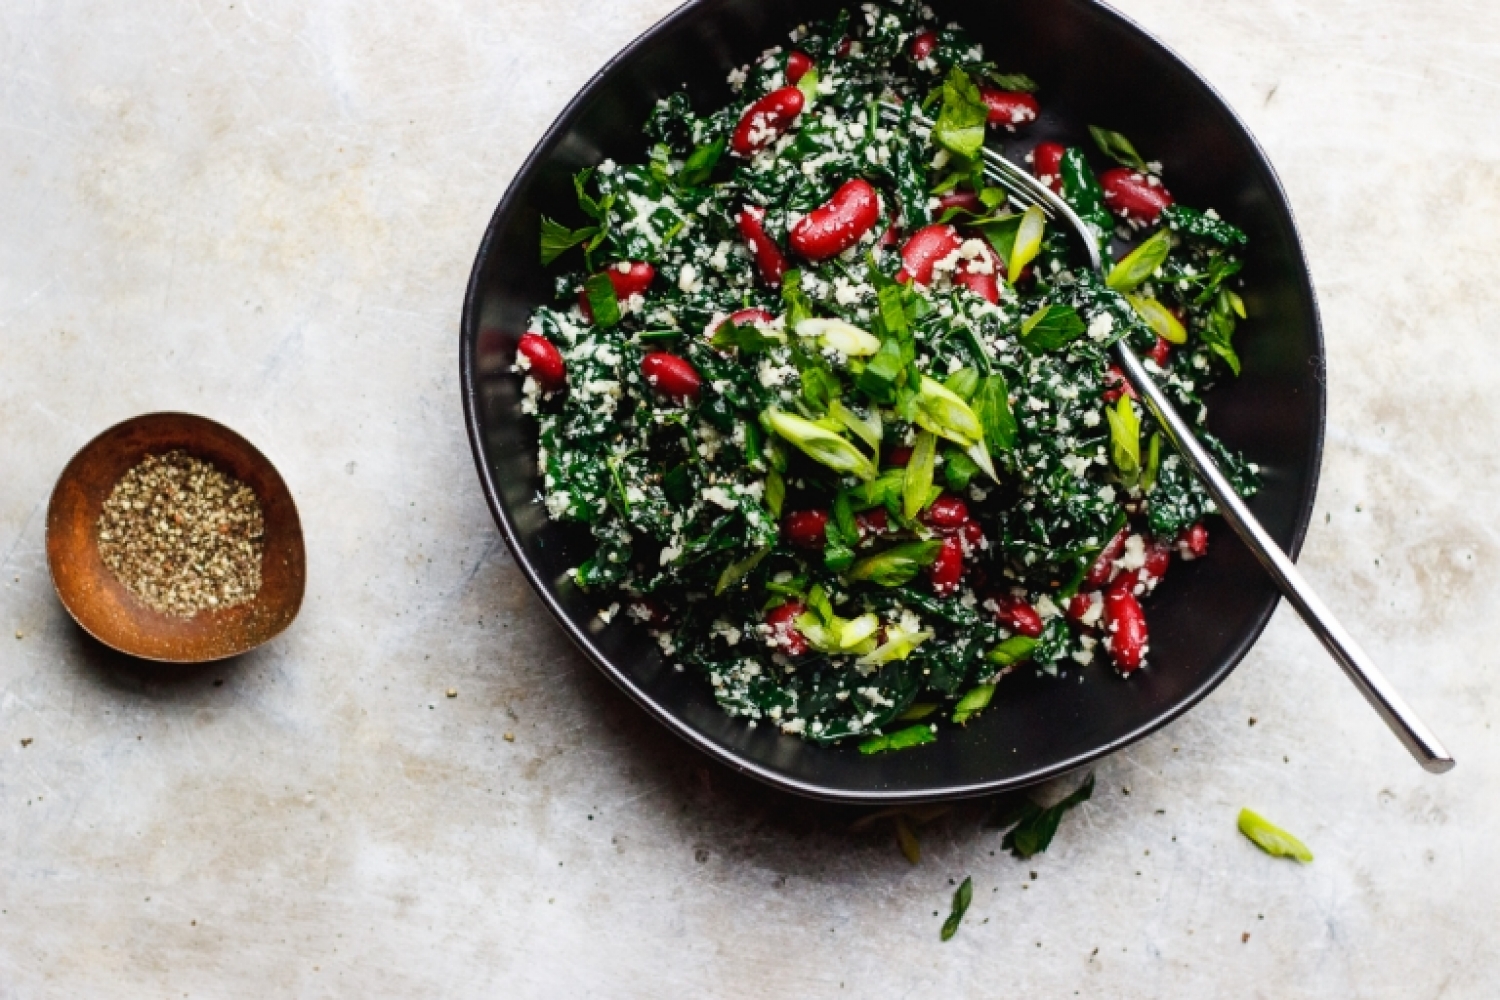 <p>Turn kale into a meal-worthy main by adding red kidney beans for protein and quick-cooking cauliflower rice. Flavored with garlic, herbs and hot sauce, it's a wholesome dish you can feel good about serving your family or friends. <a href="https://withfoodandlove.com/garlicky-kale-with-red-beans-rice-a-lundberg-family-farms-giveaway/" rel="noopener">Get the recipe here.</a></p>